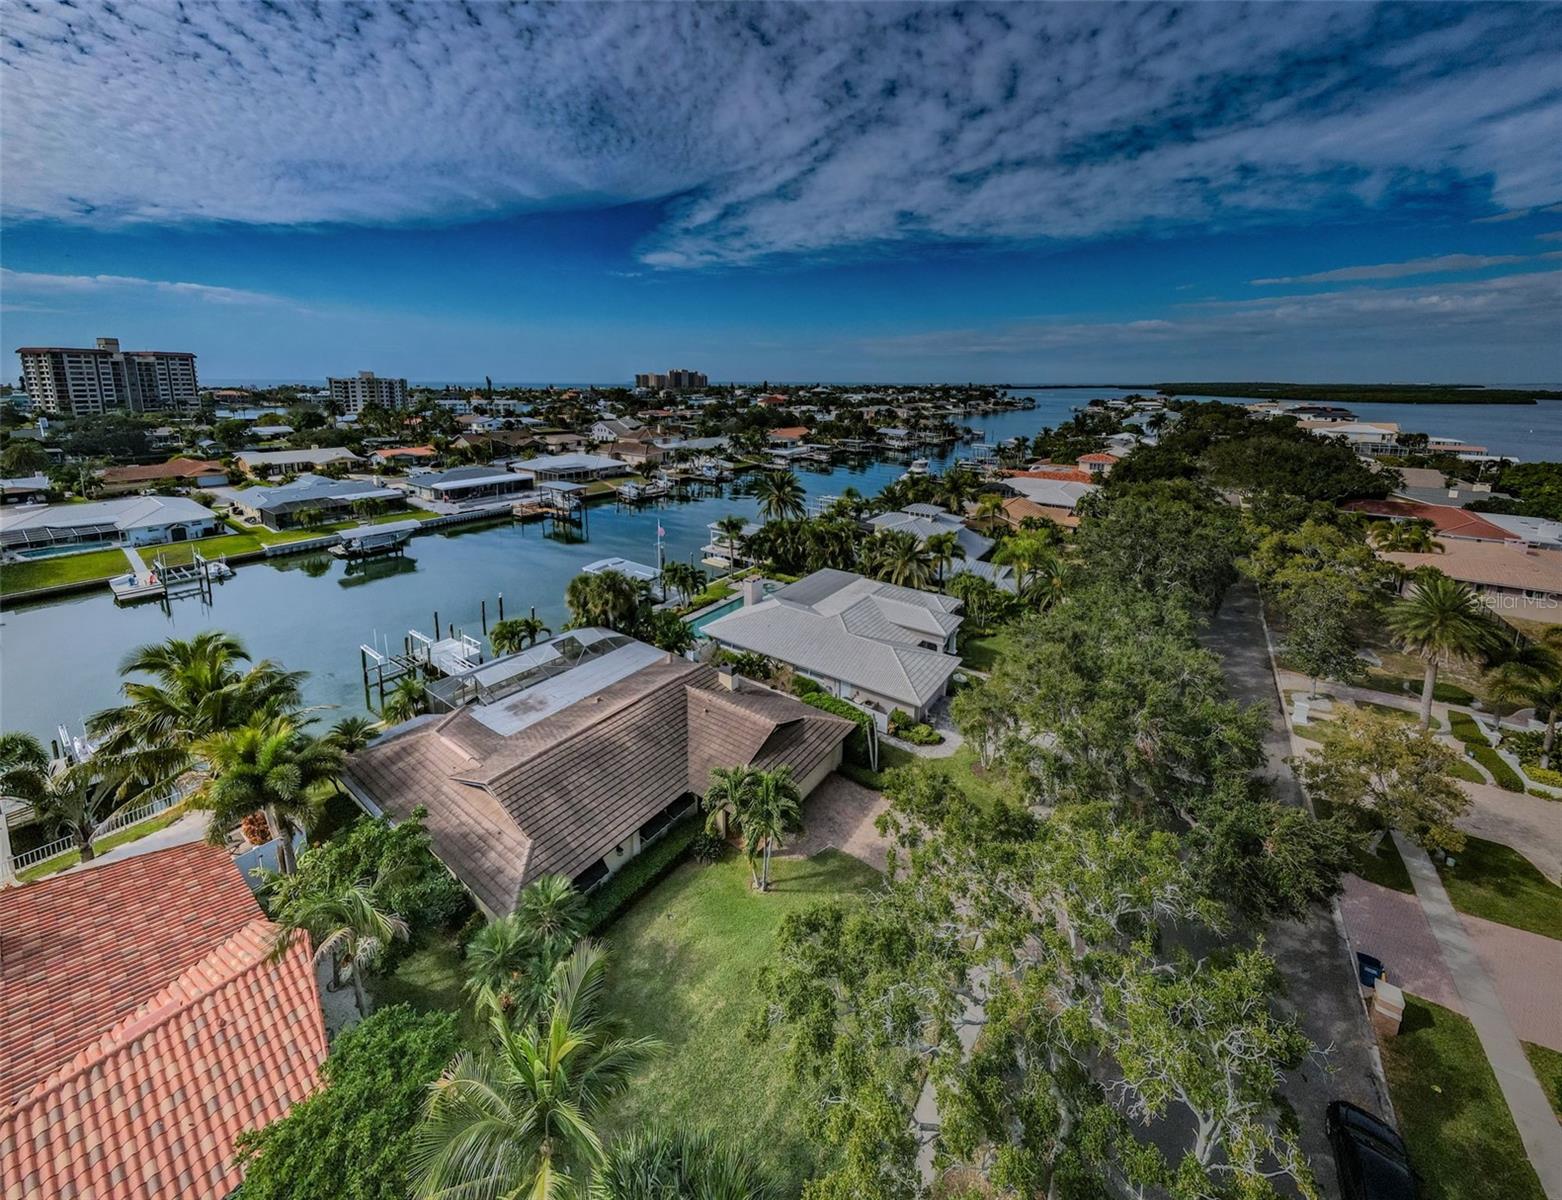 This aerial perspective provides a unique glimpse of the property's position in the neighborhood, offering a bird's-eye view of its beauty and potential.